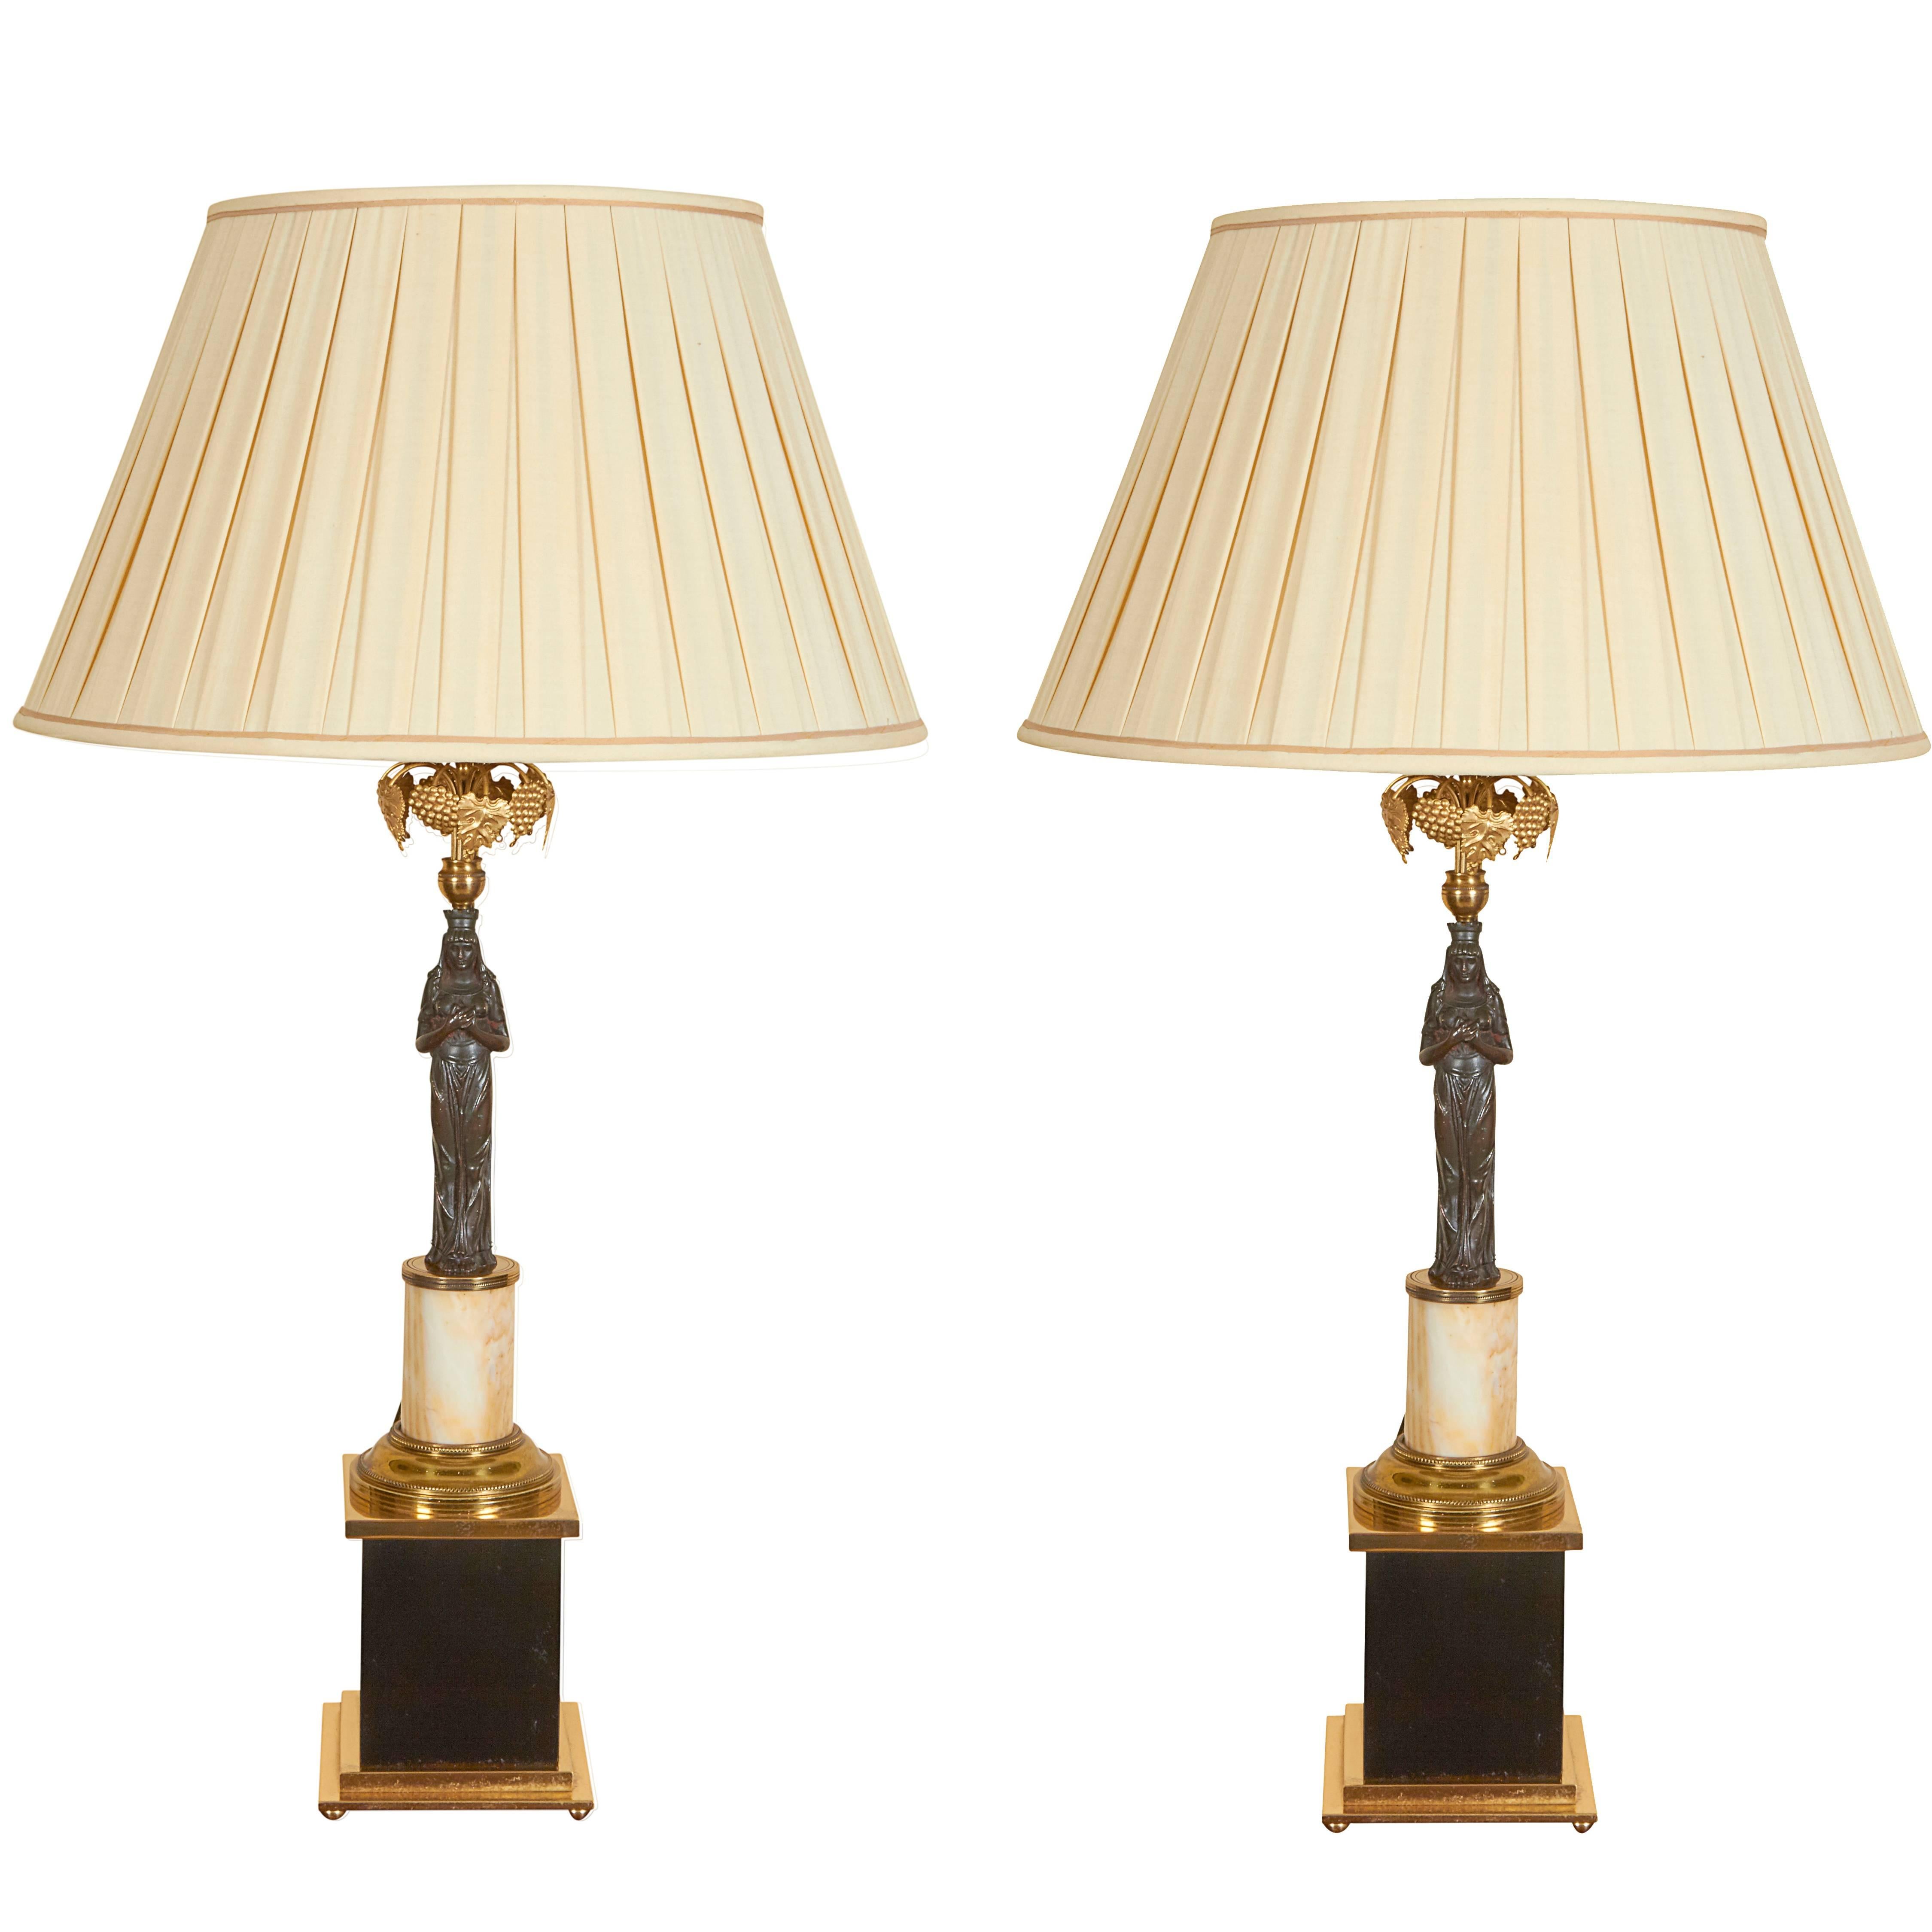 Pair of Neoclassical Style Figural Lamps